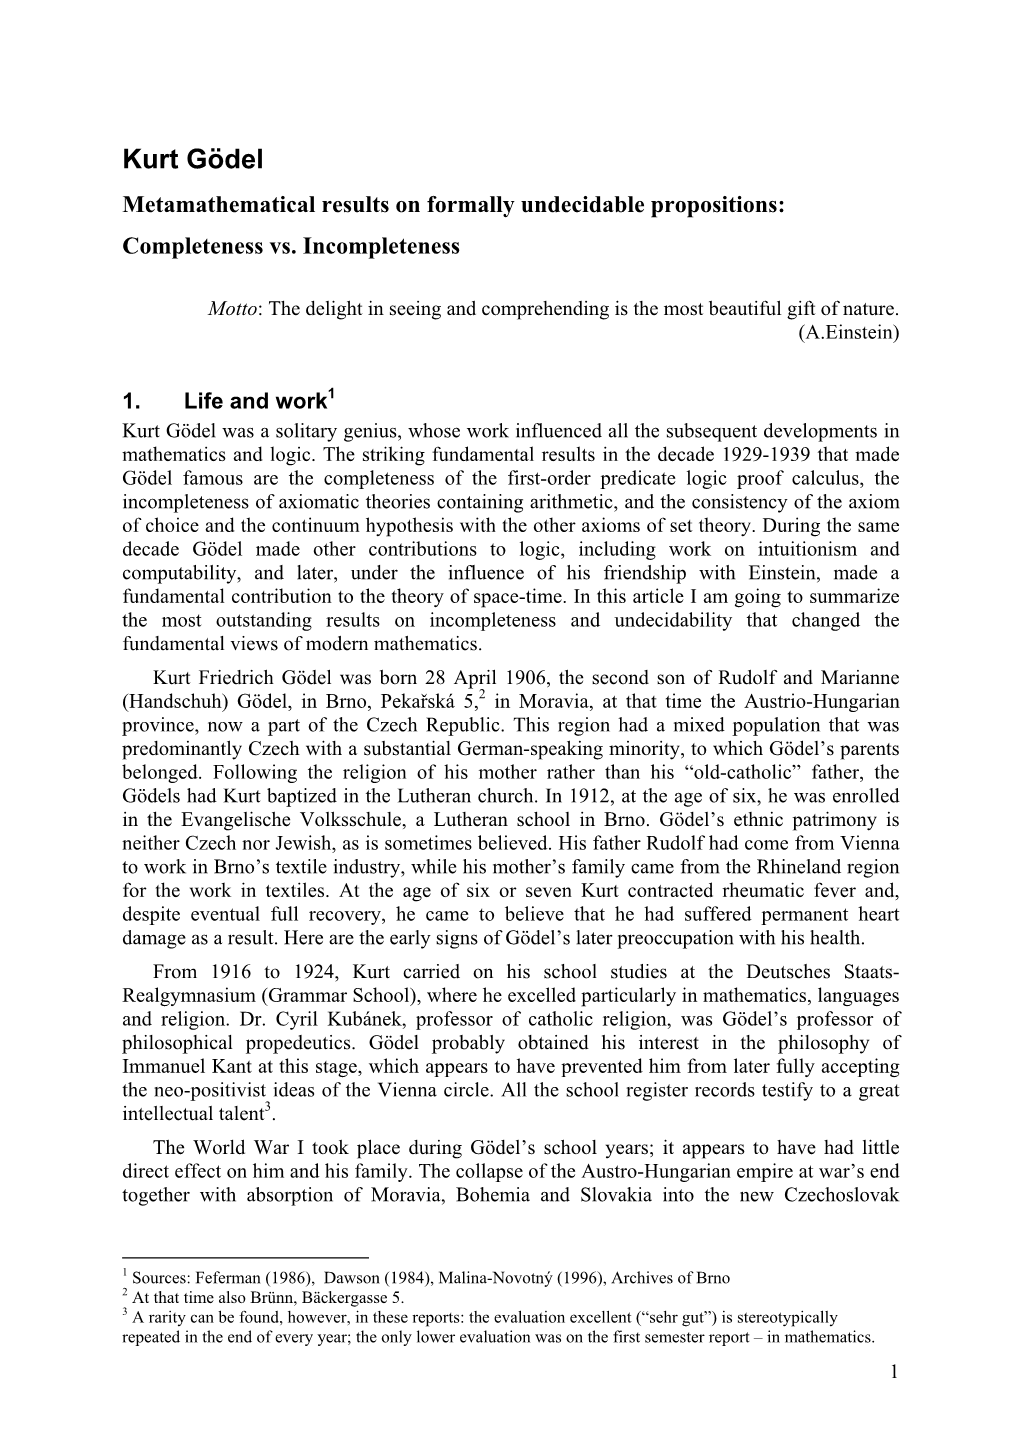 Kurt Gödel Metamathematical Results on Formally Undecidable Propositions: Completeness Vs